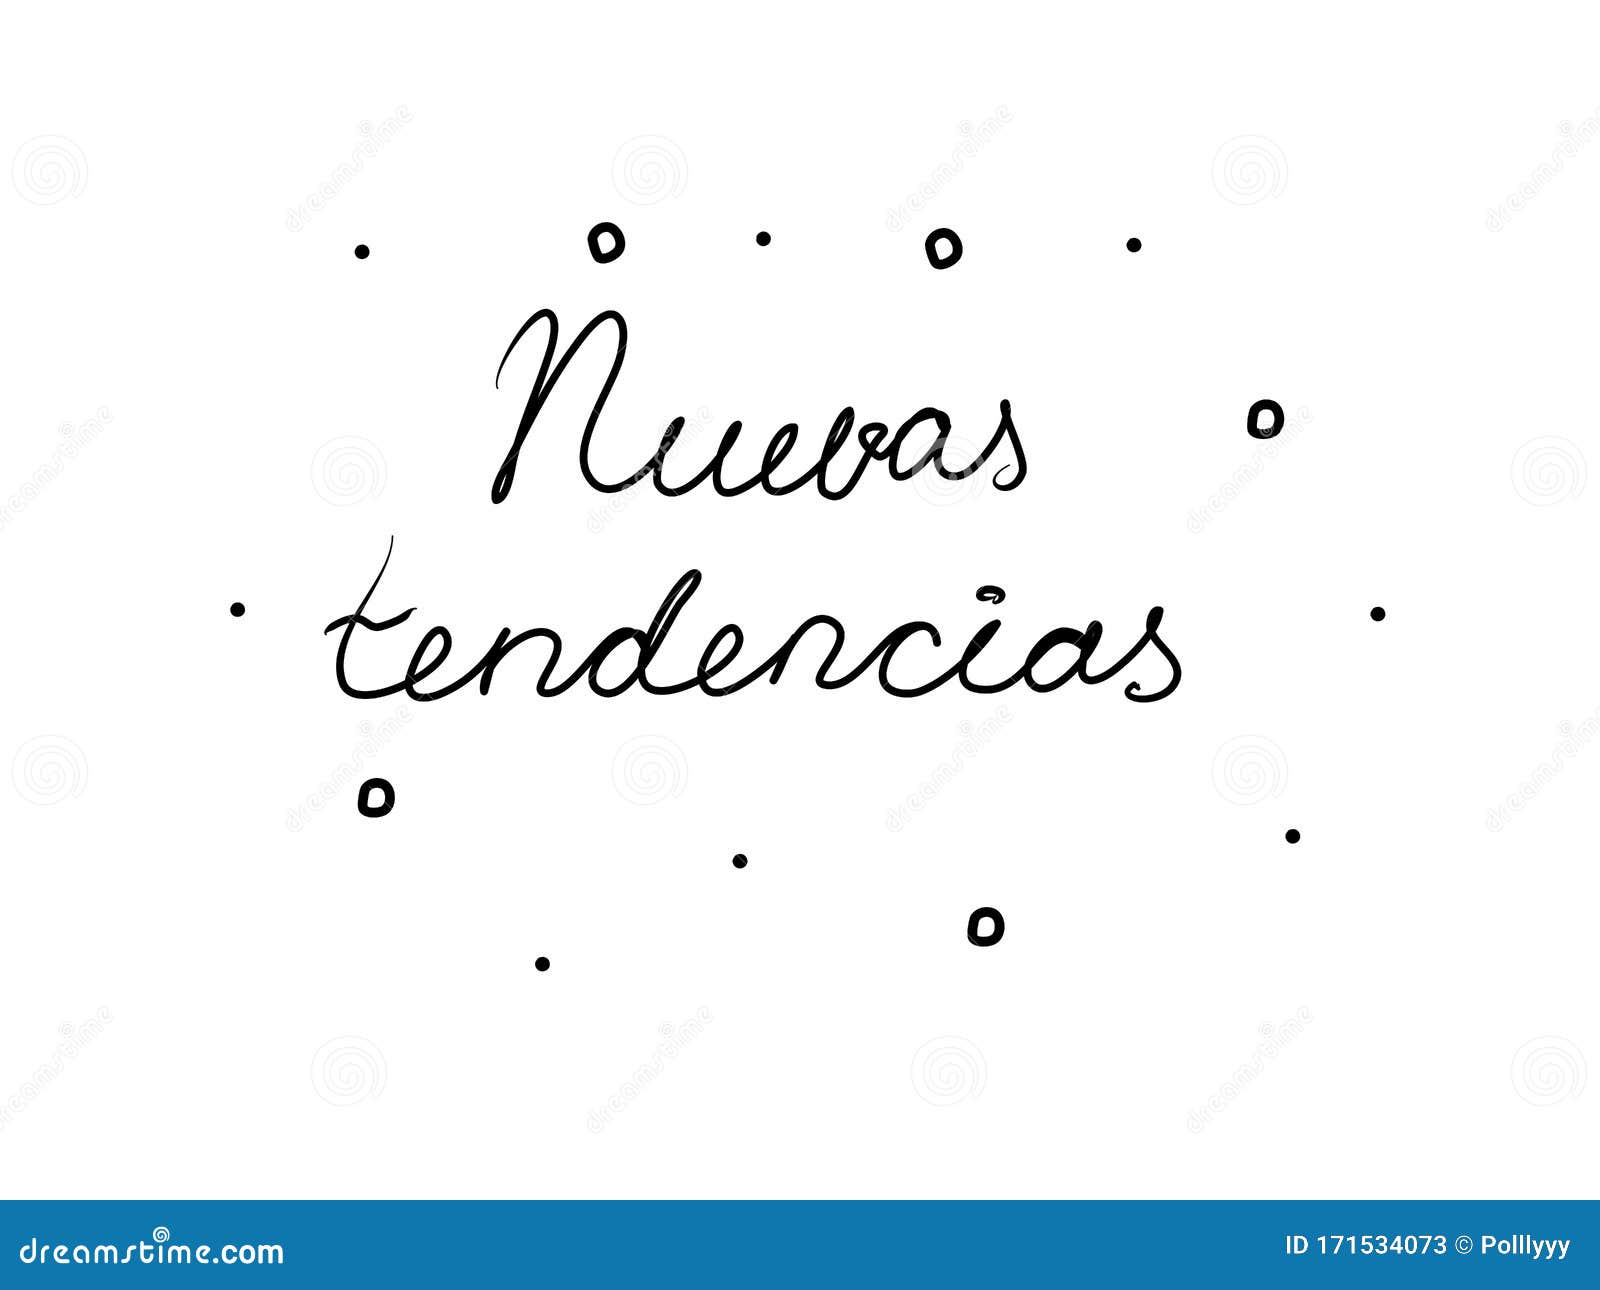 nuevas tendencias phrase handwritten with a calligraphy brush. new trends in spanish. modern brush calligraphy.  word